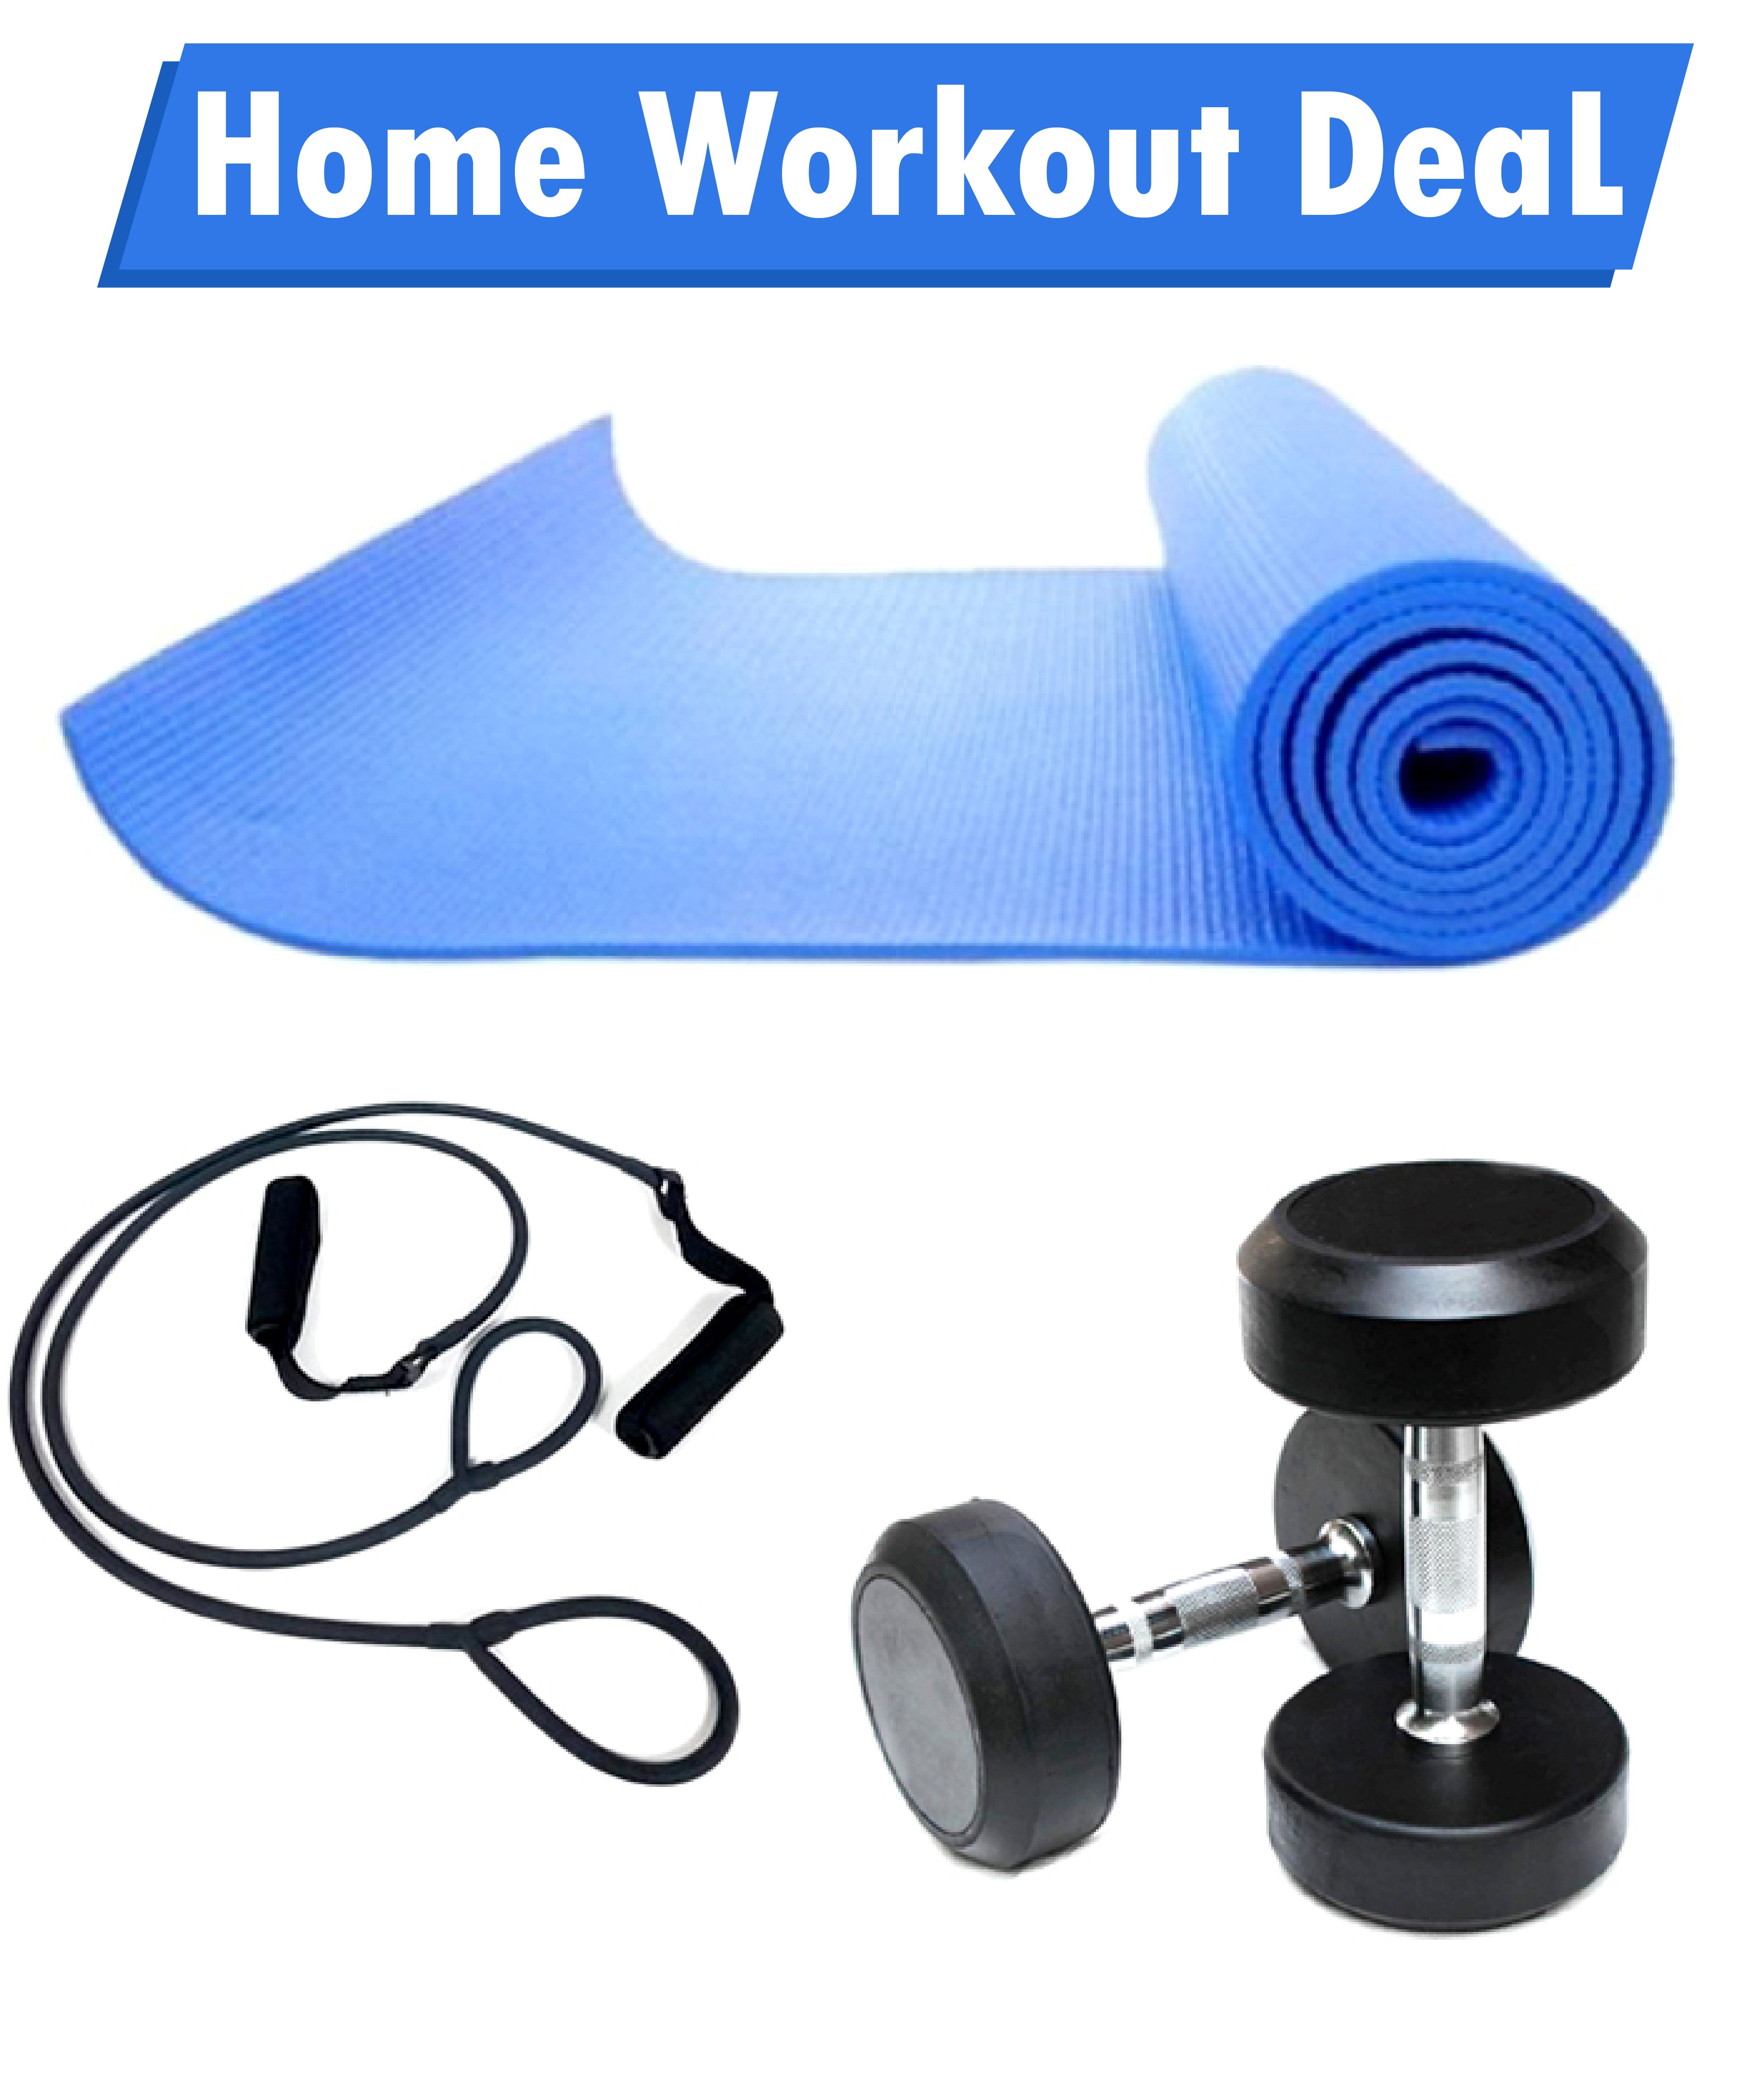 Home Workout Deal 2